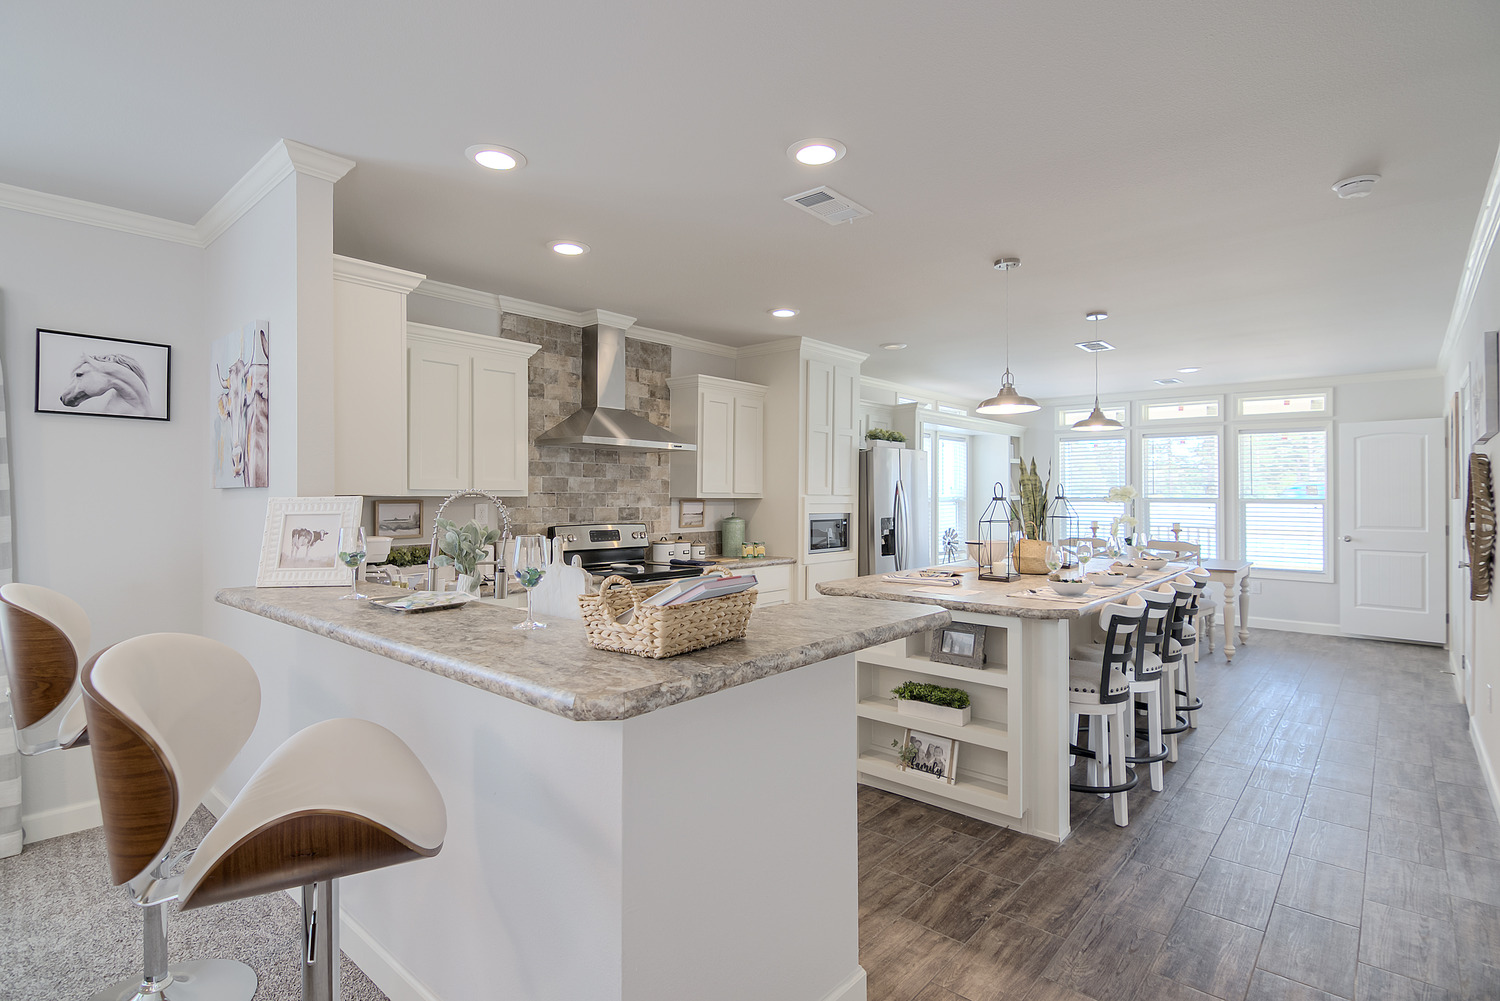 Oak Creek Homes Special Offers Factory Direct Discount Pricing on Limited Edition Homes